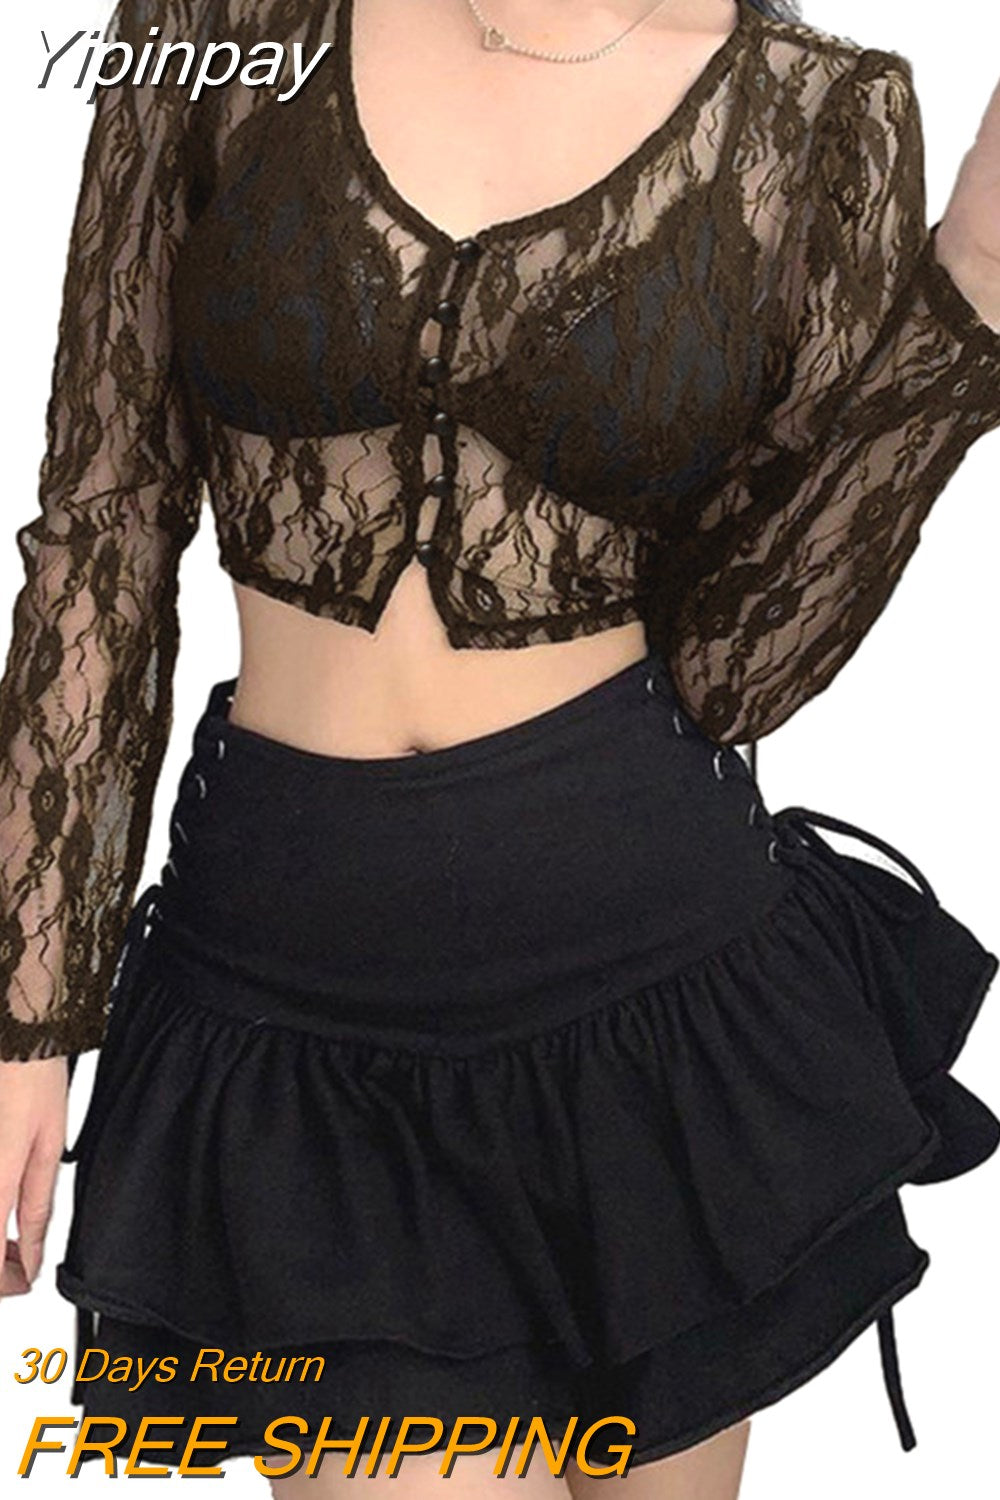 Yipinpay Women Lace T-shirts Fall Winter 2023 Sexy Mesh Crop Top Clothes 2000s Clothes y2k Fairy Grunge Long Sleeve Top Streetwear Club